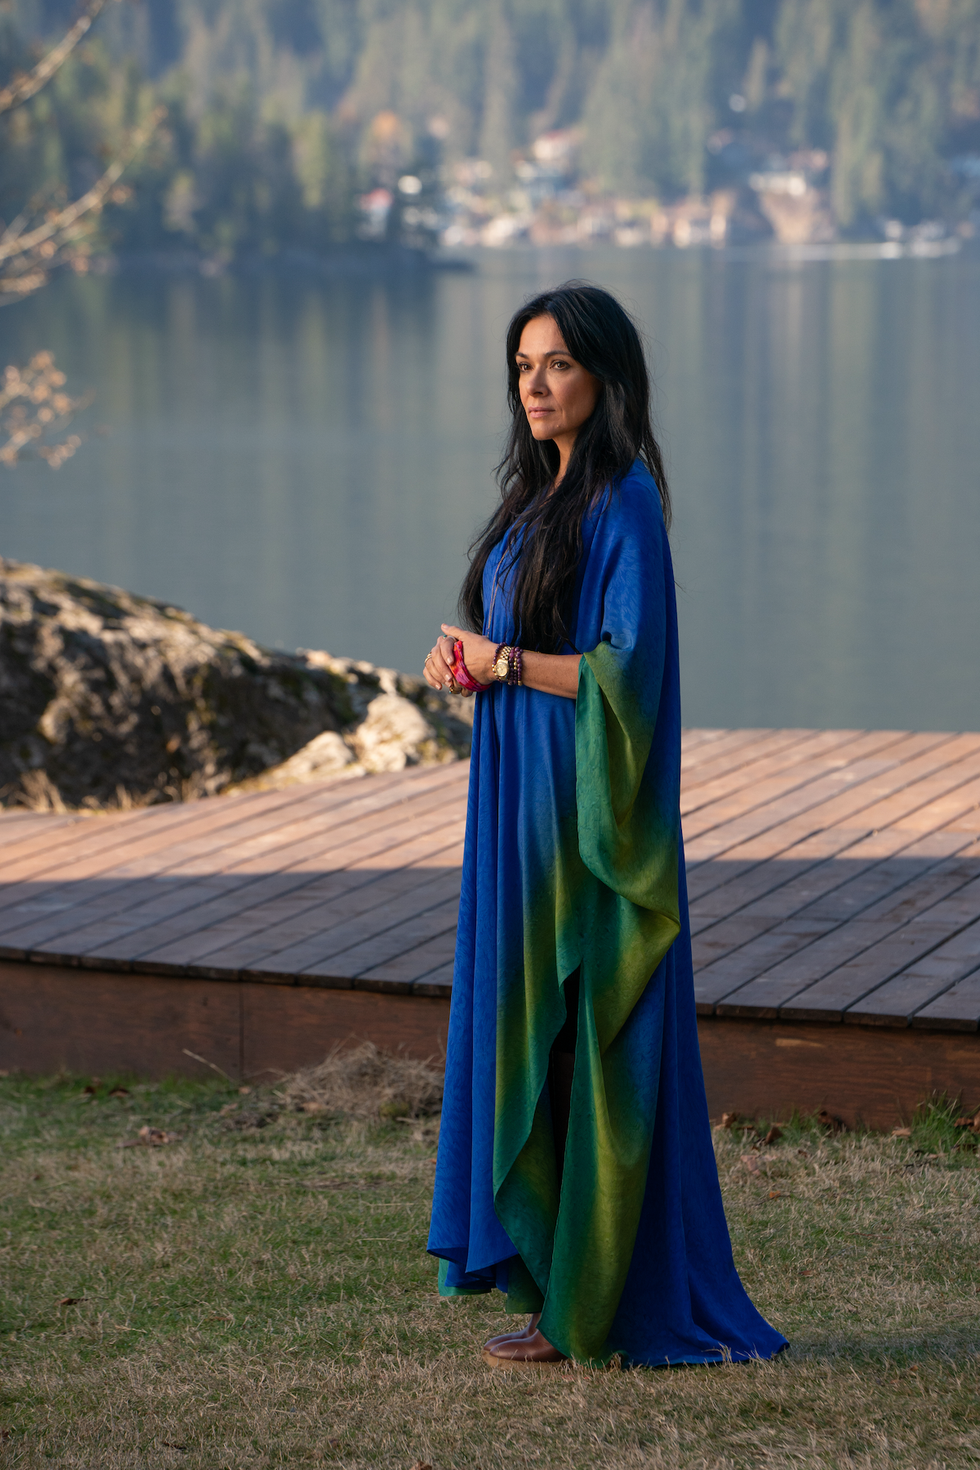 simone kessell wearing a long blue and green caftan as lottie in yellowjackets, "qui"